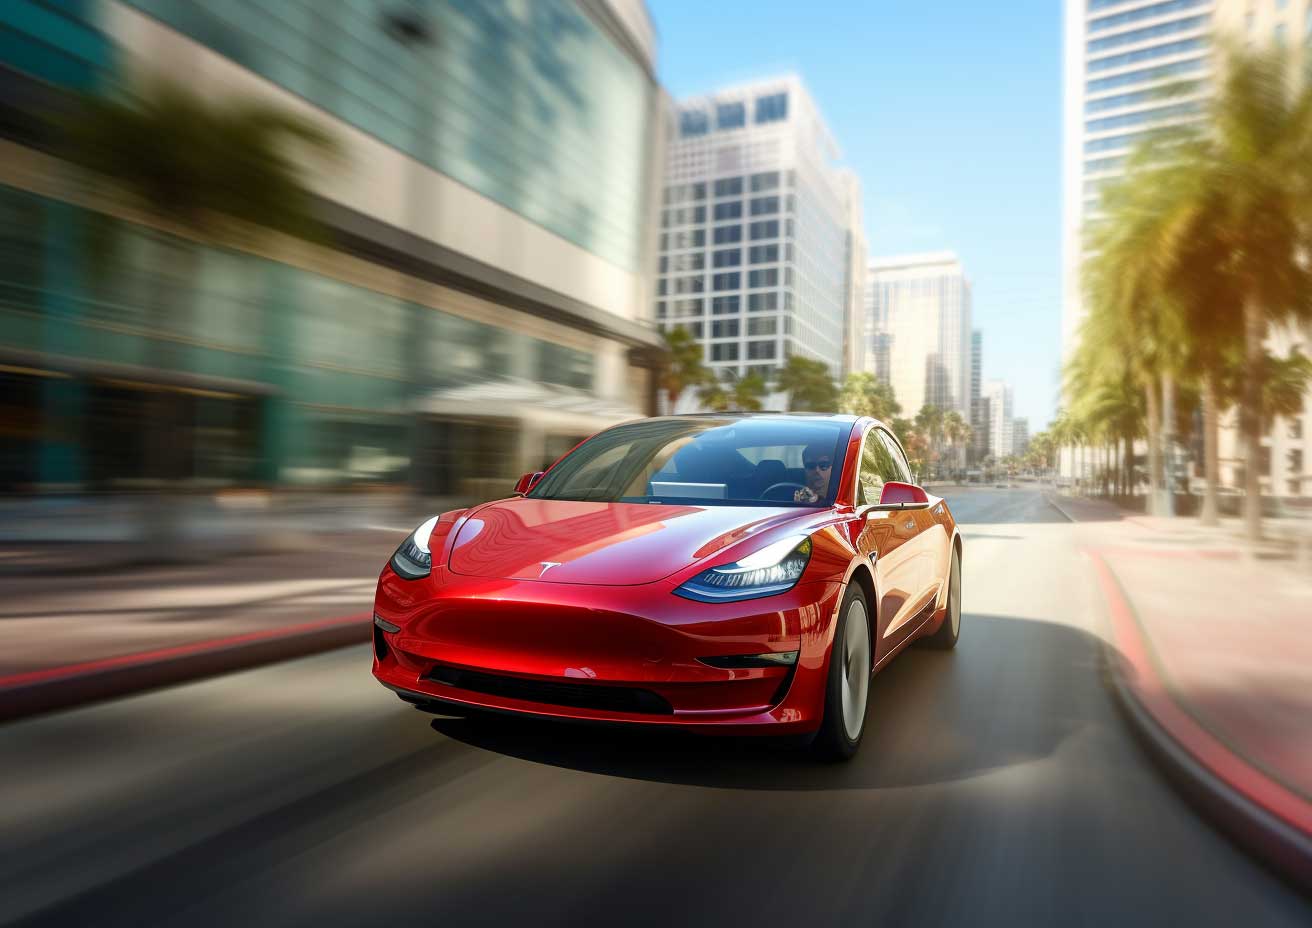 The Tesla Model 3 is driving down a city street, demonstrating its oil-free technology.